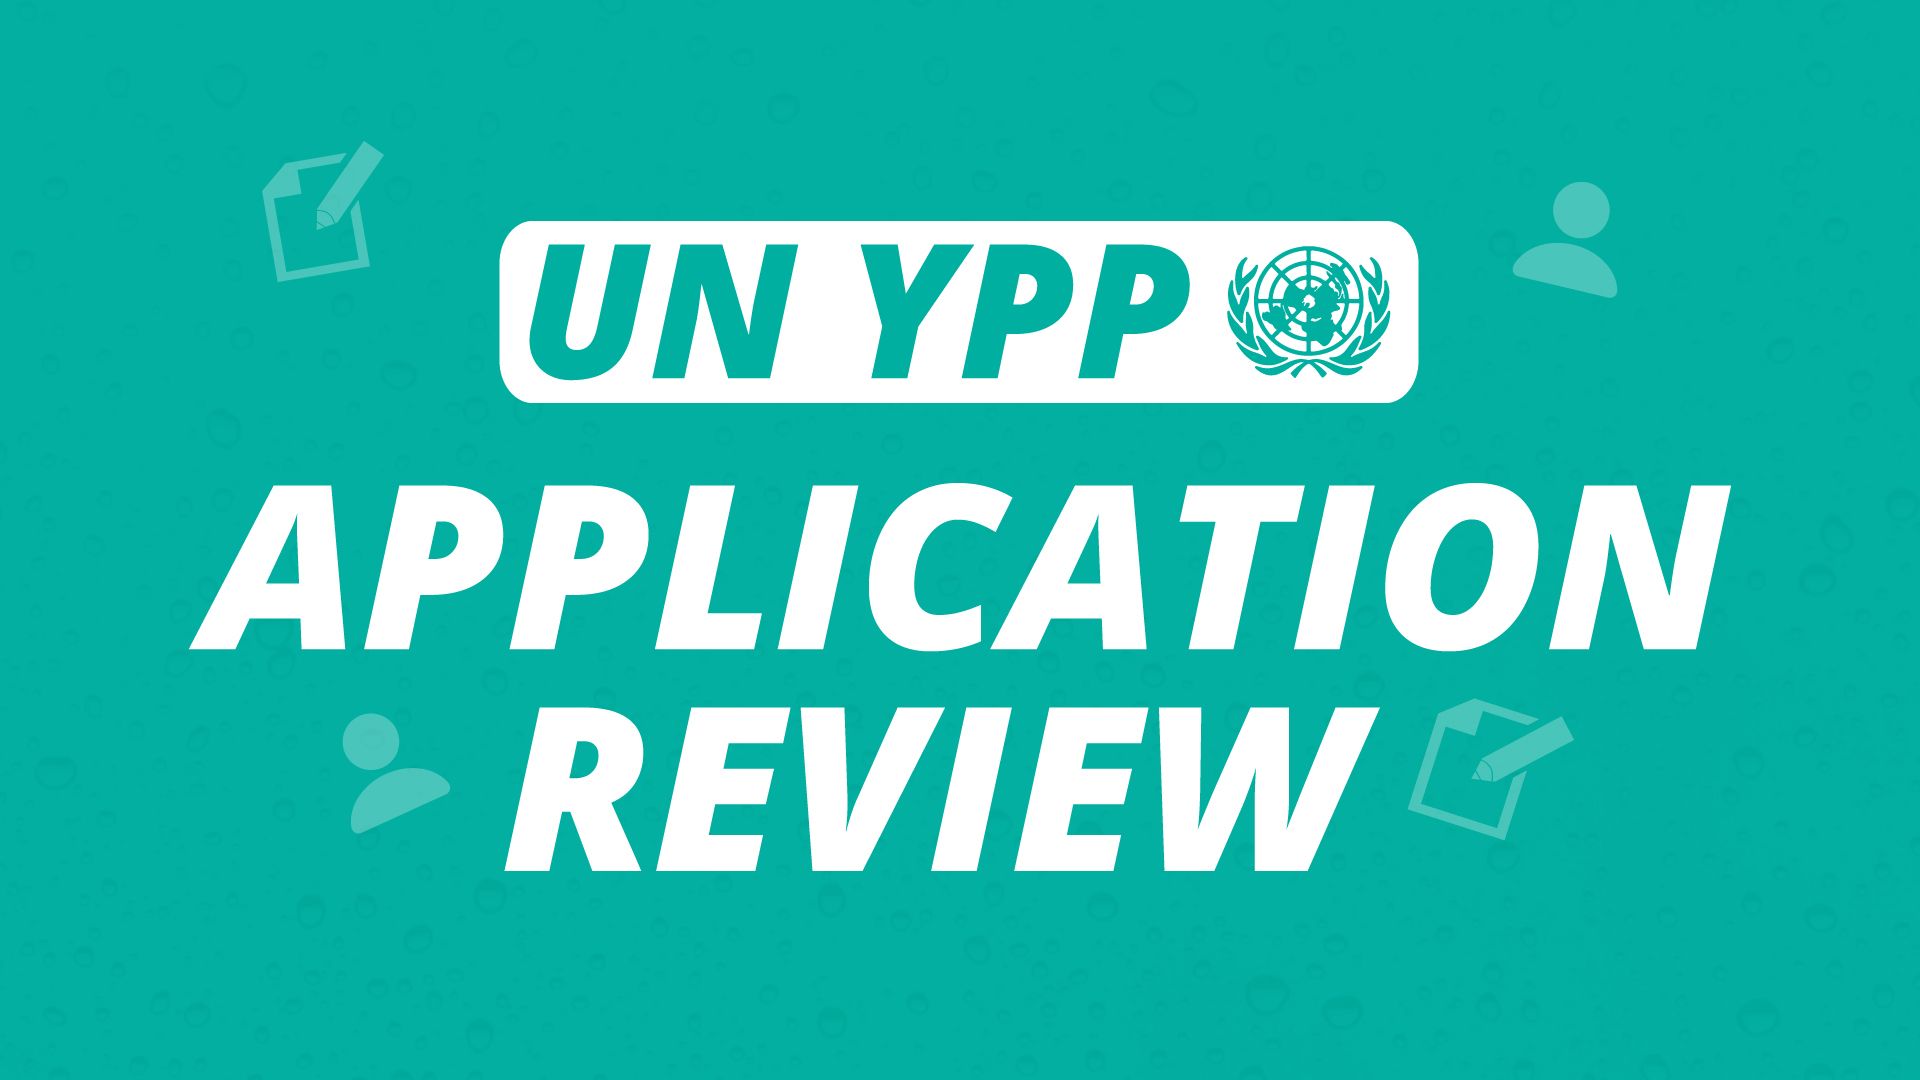 UNYPP-Application-Review